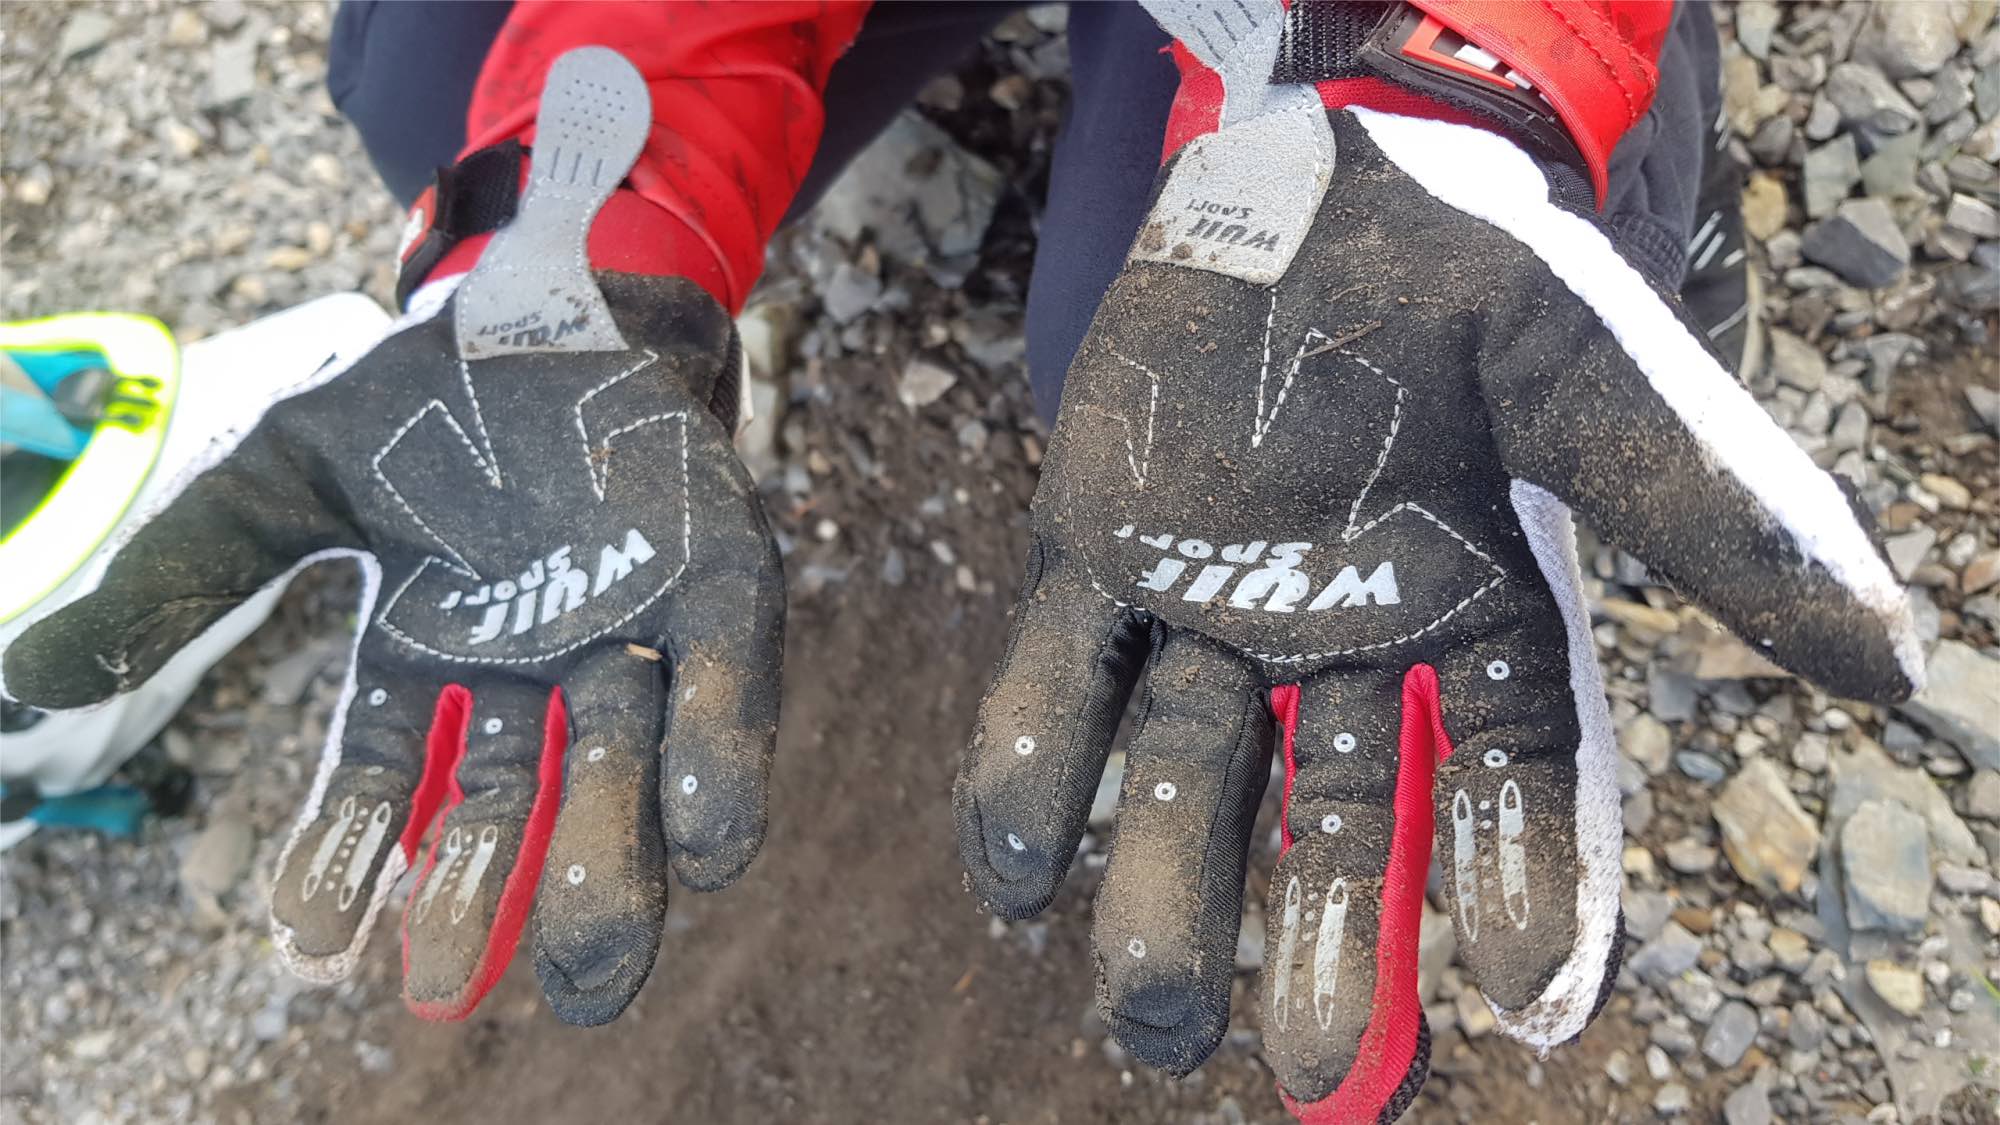 Wulf sport kids cycling gloves - review 